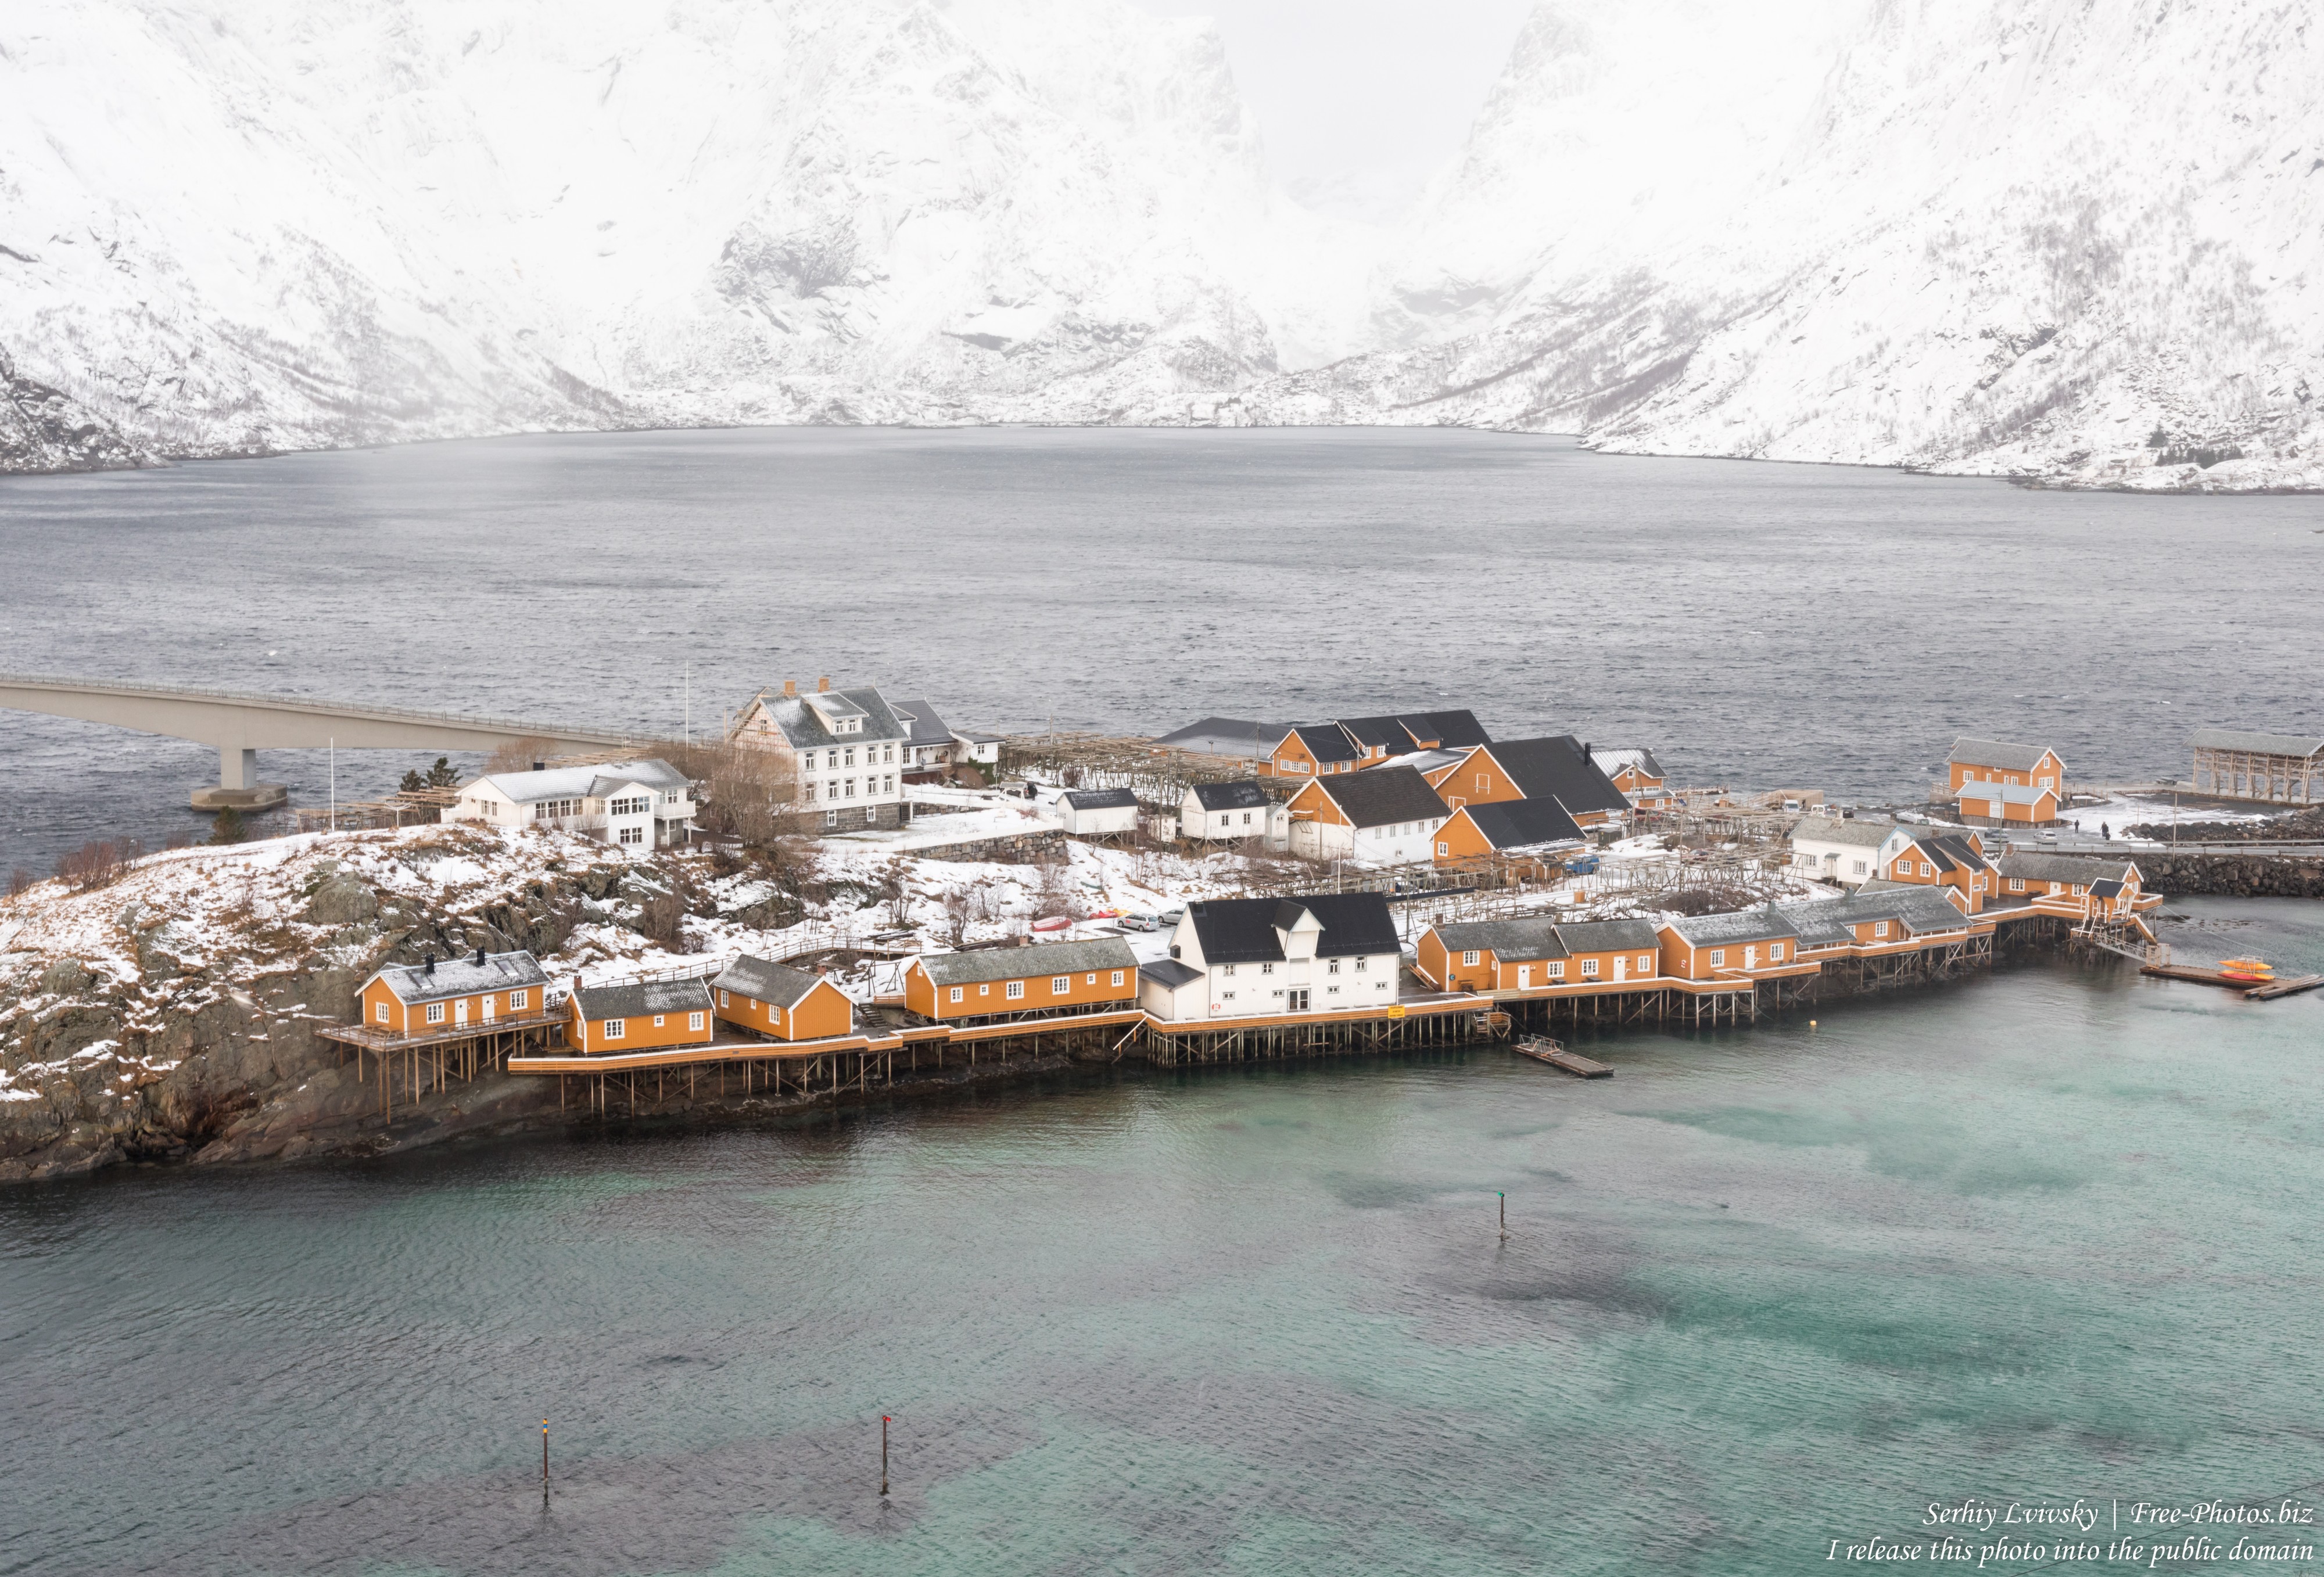 Sakrisoy and surroundings, Norway, in February 2020 by Serhiy Lvivsky, picture 15